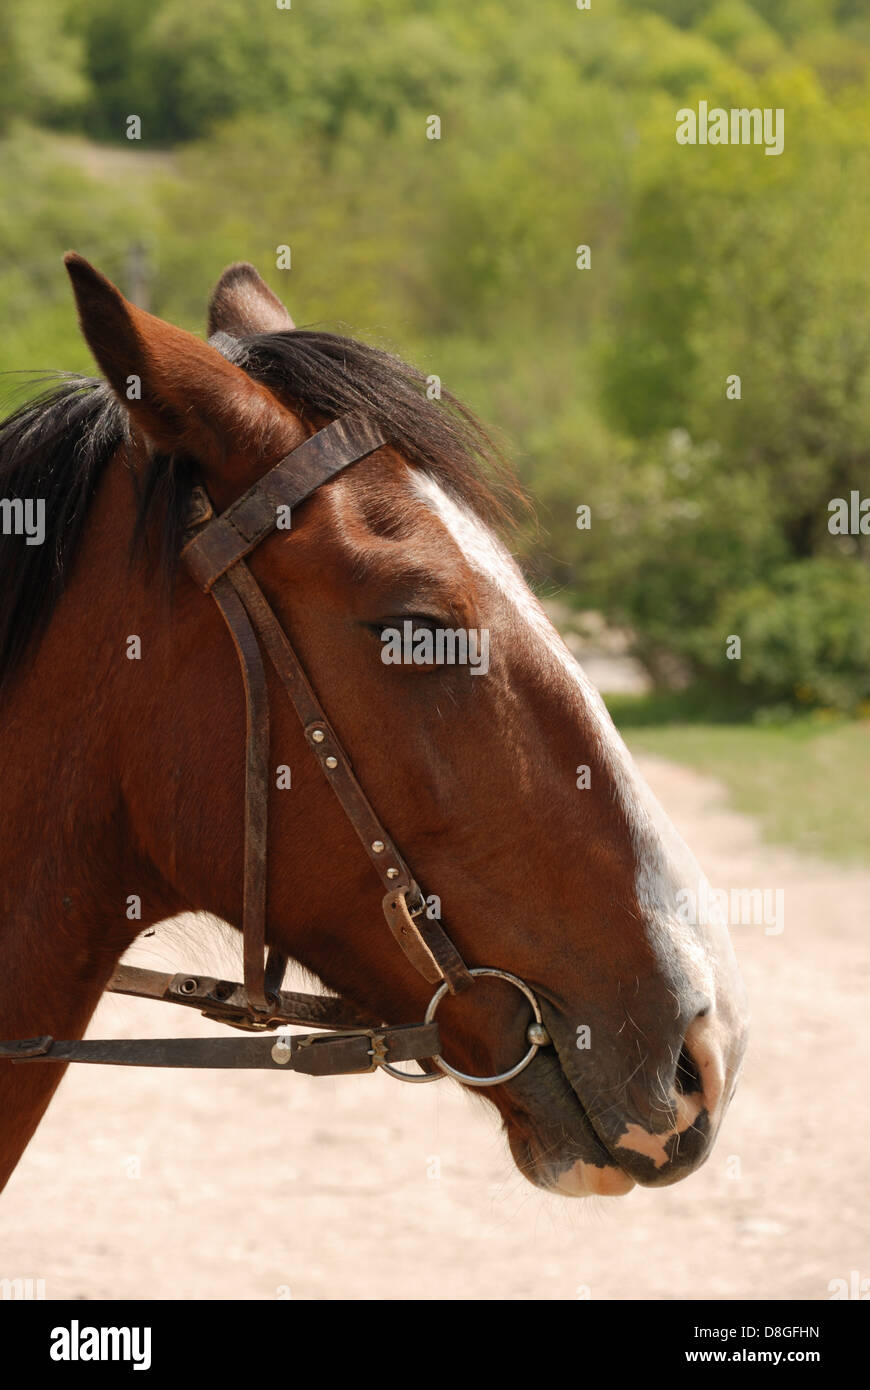 Horse brown color Stock Photo